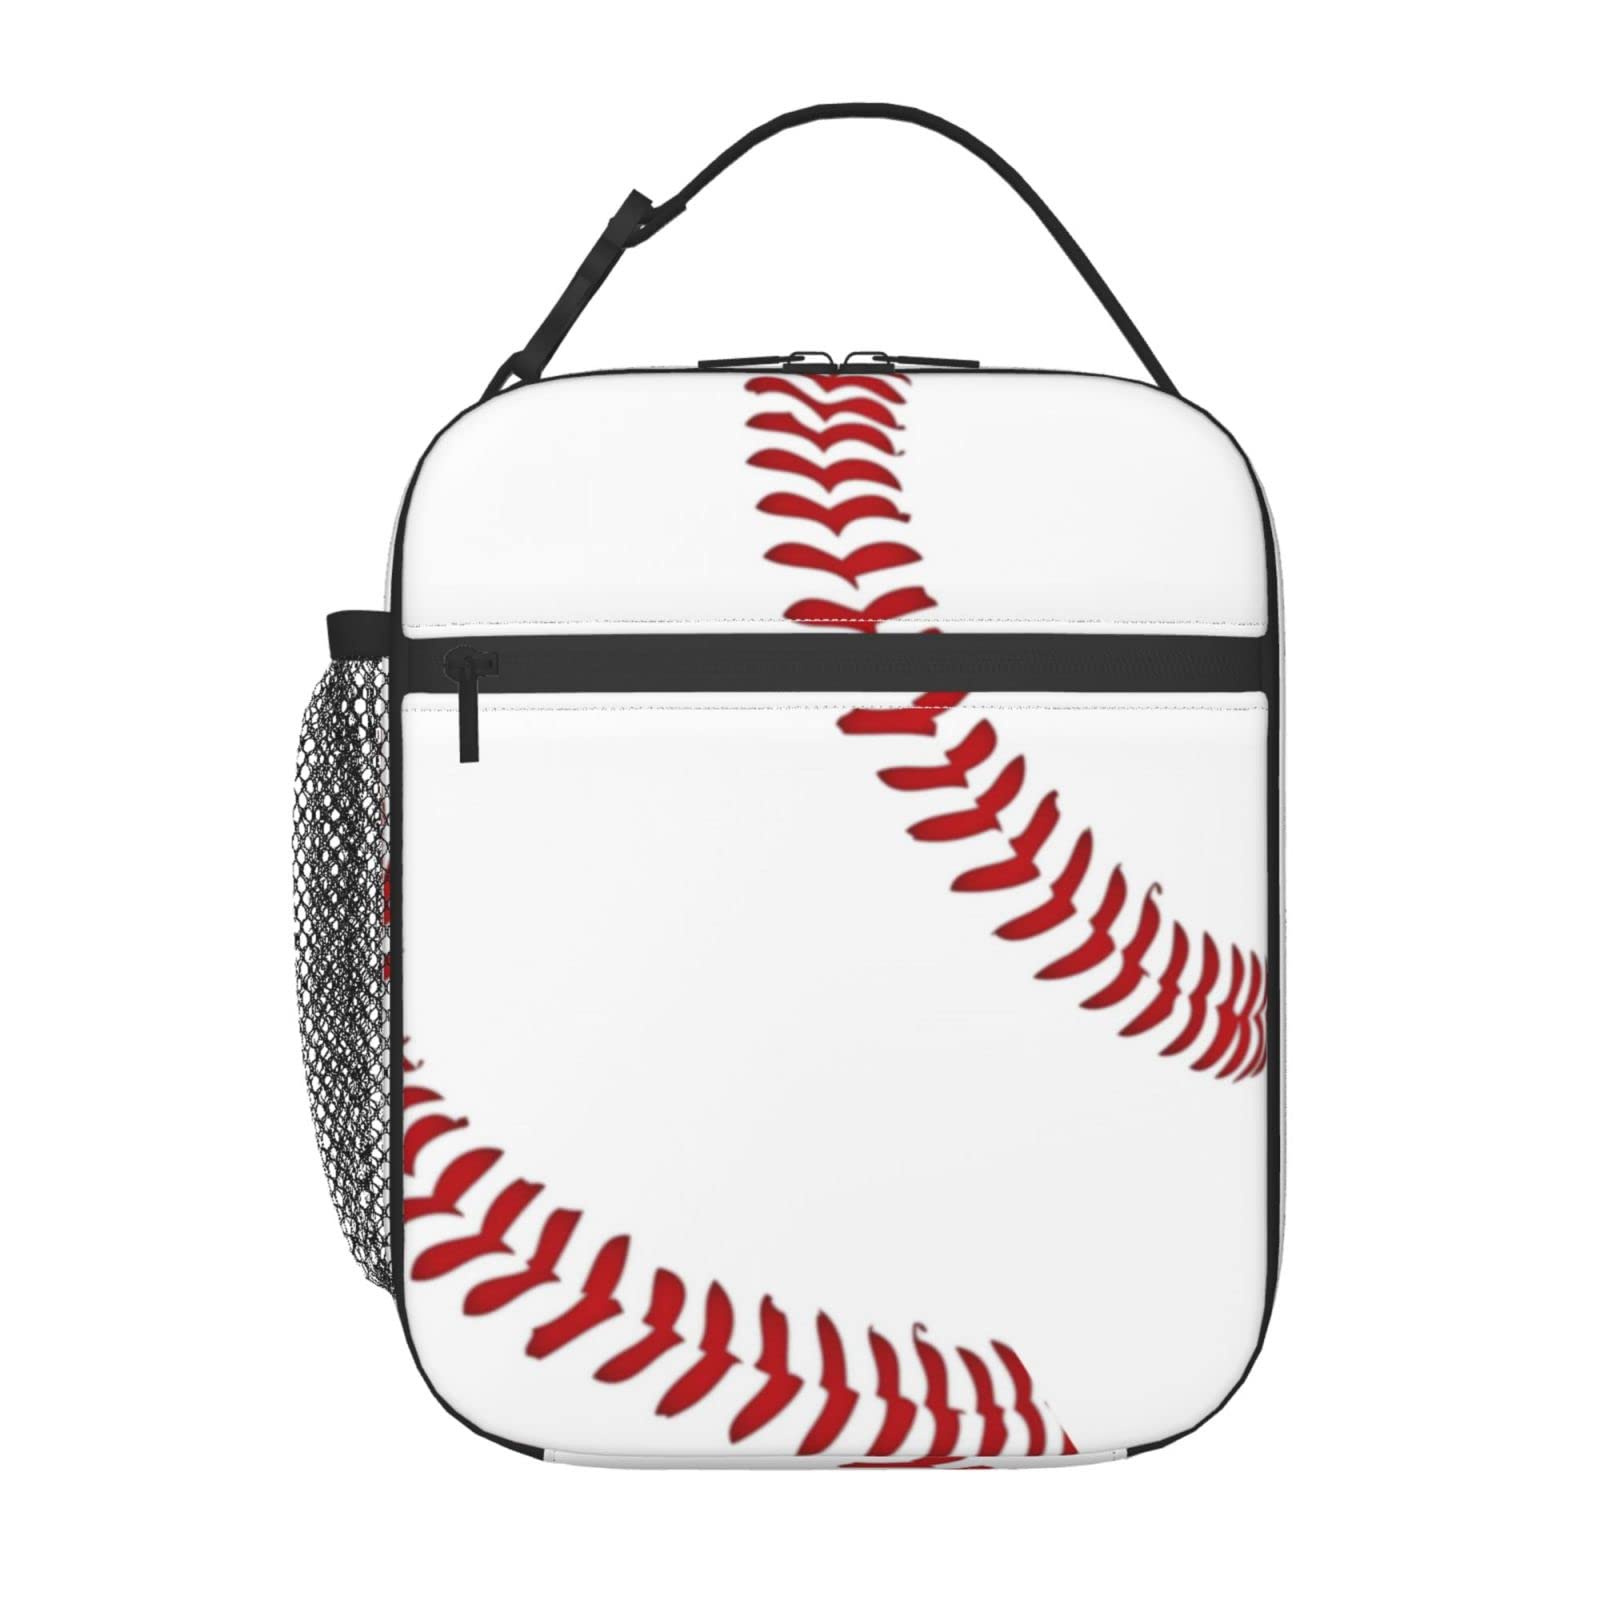 Lunch Box For Men Women Adults Gifts Small Lunch Bag For Office Work Reusable Portable Lunchbox Personalized Baseball Sports